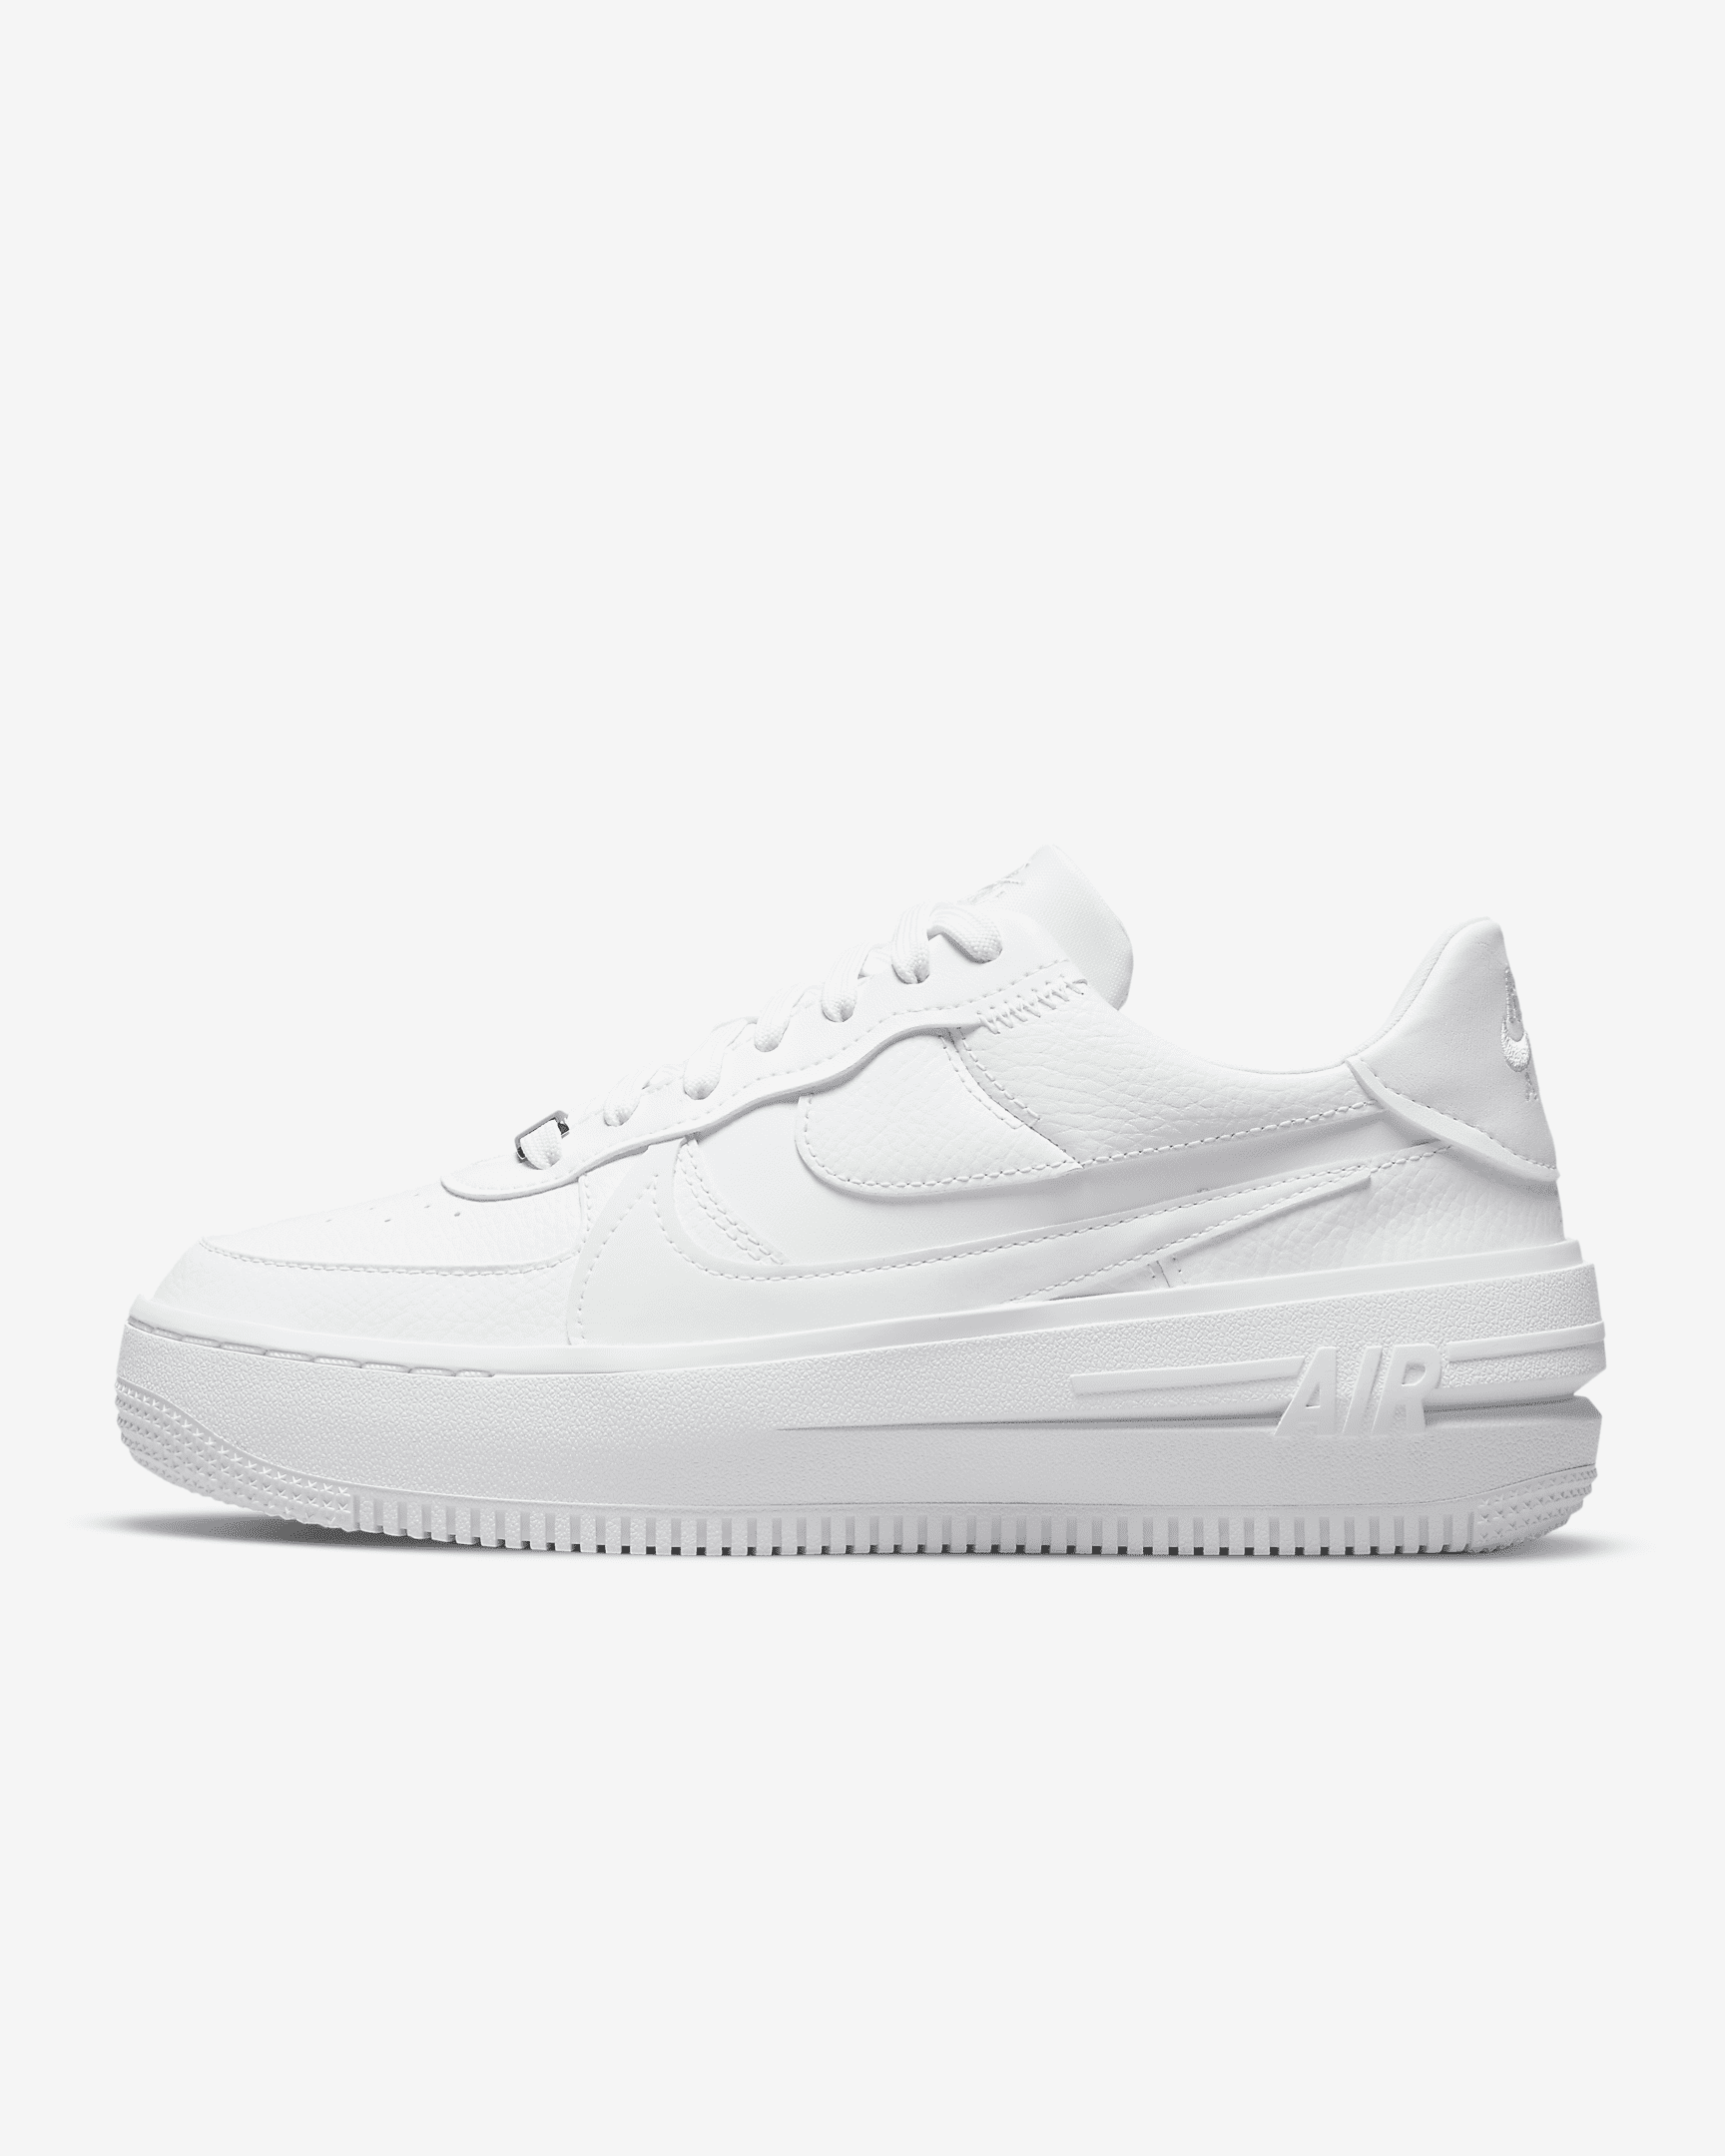 womens white nike air force 1 size 8